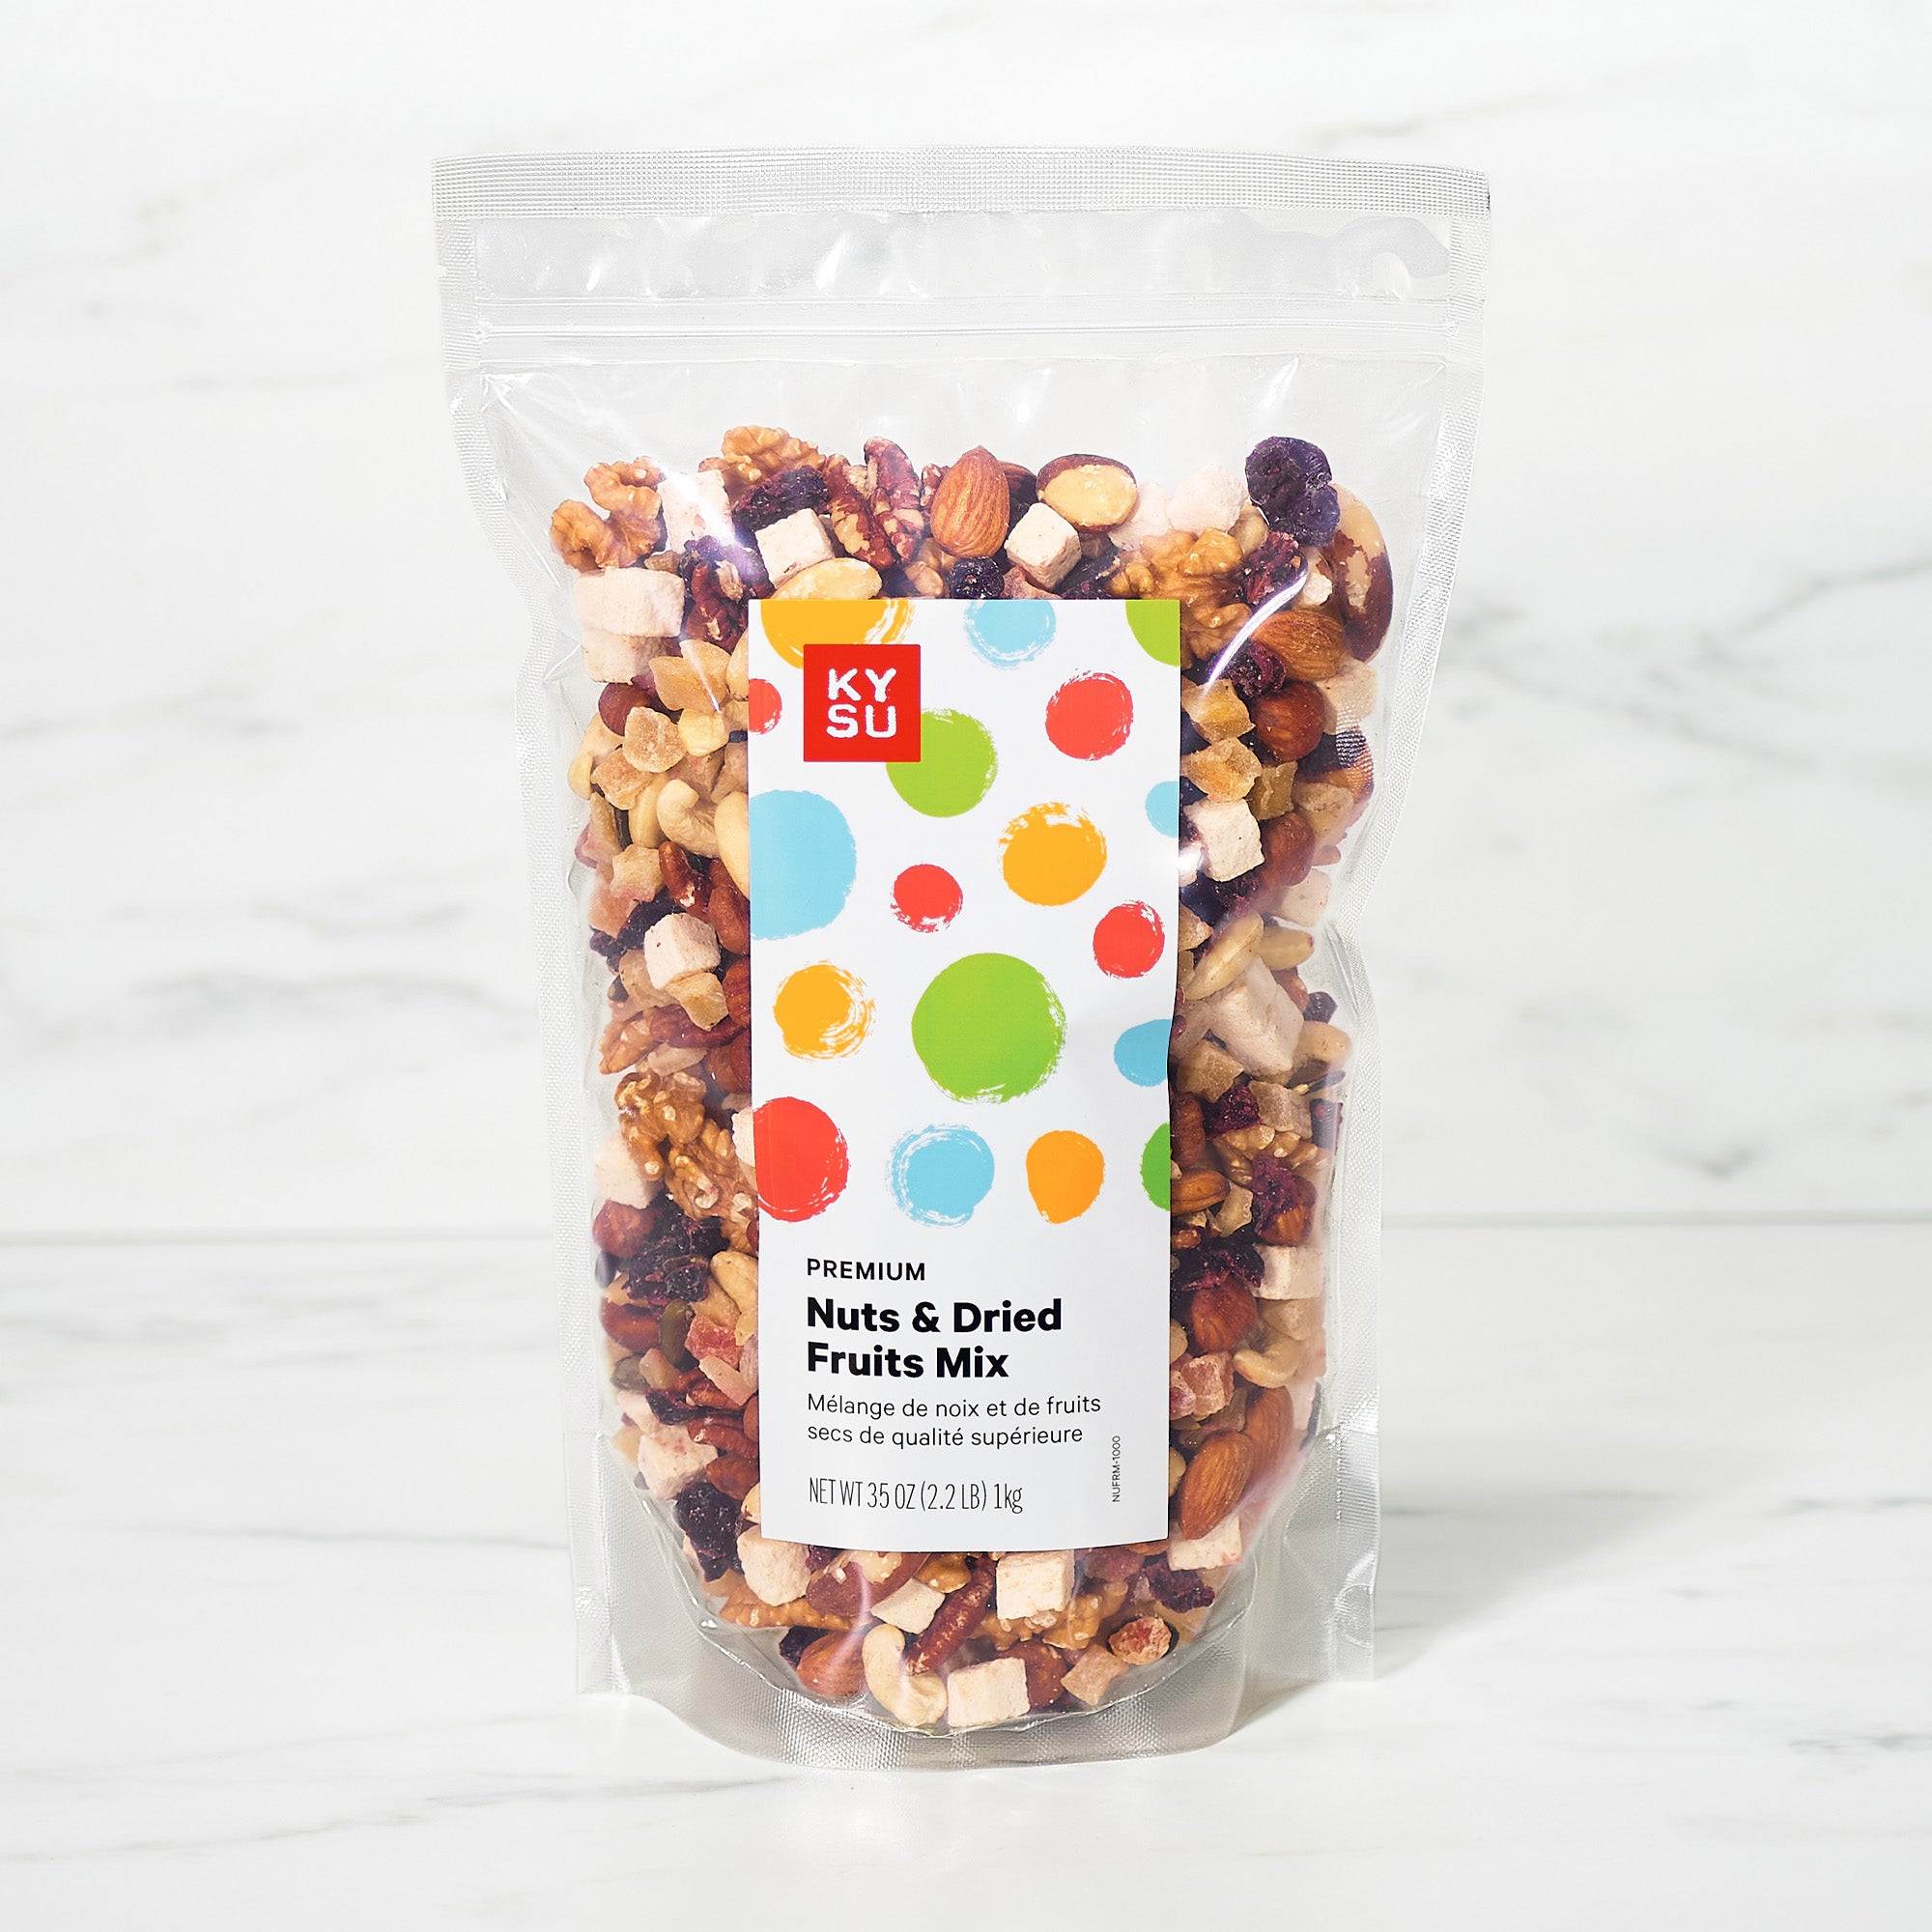 Premium Nuts and dried fruits mix, 2.2 lb